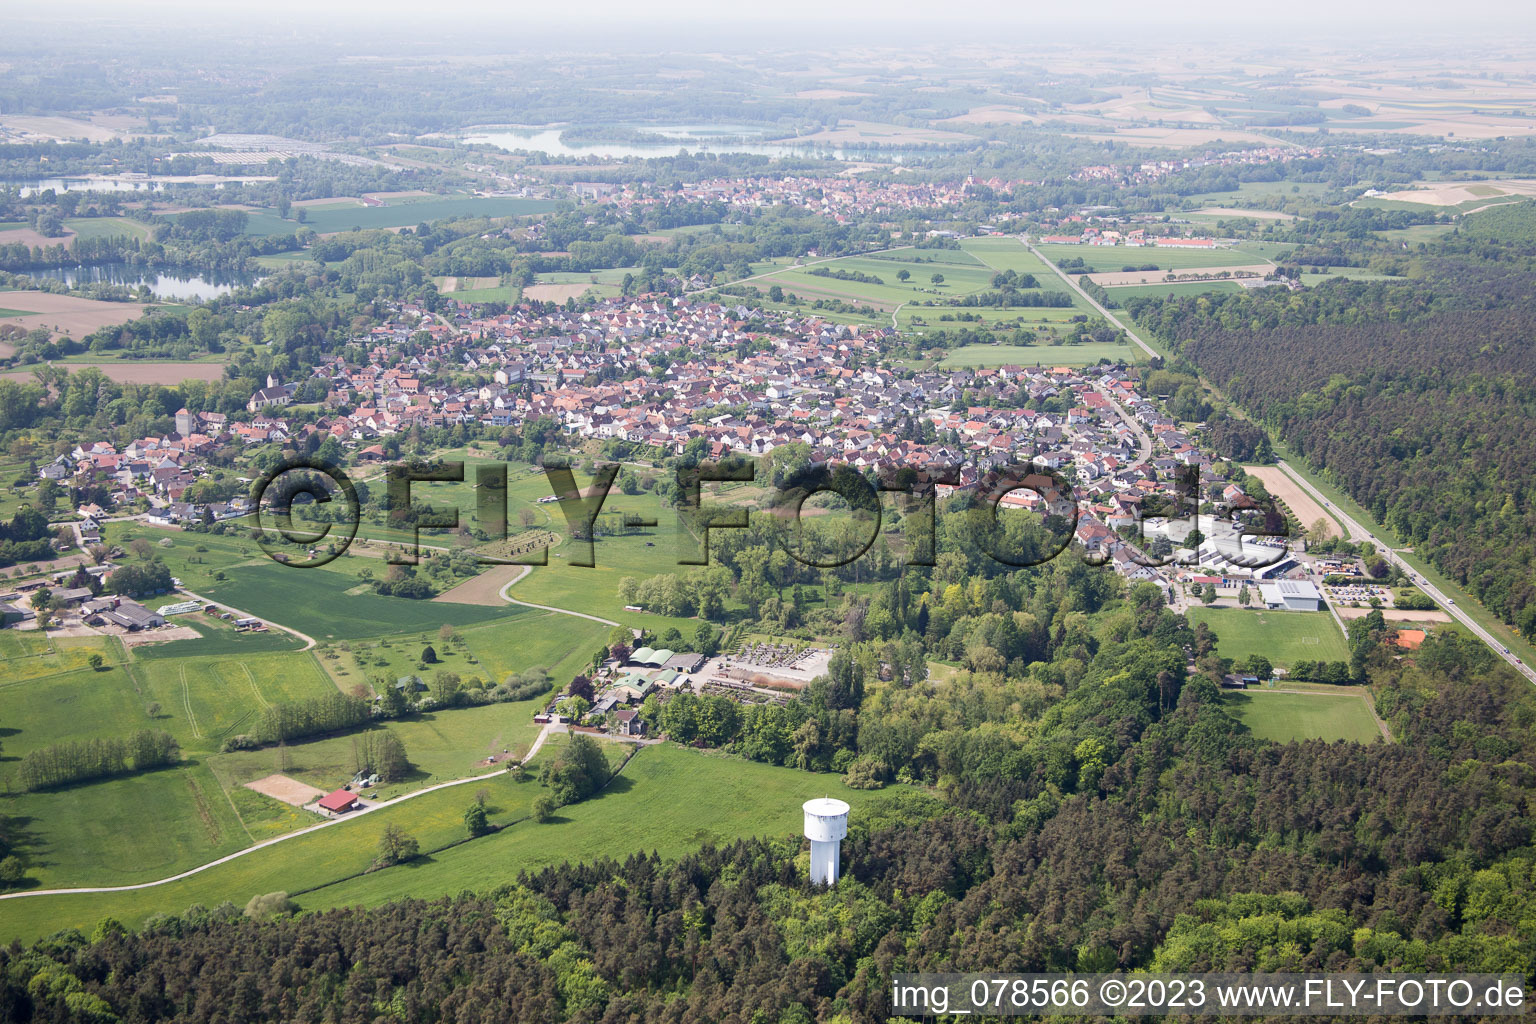 Berg in the state Rhineland-Palatinate, Germany viewn from the air